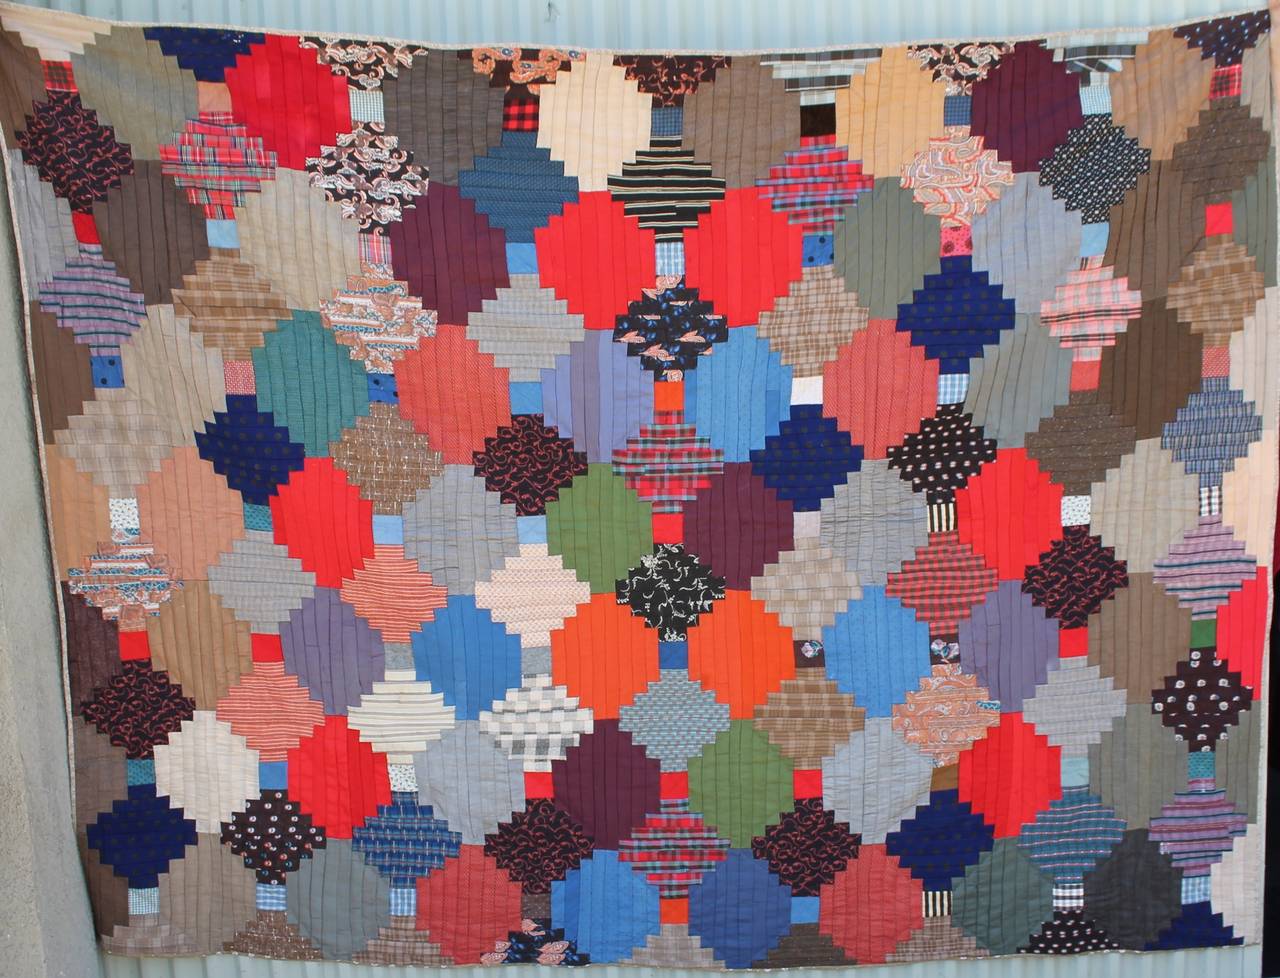 This is a fine example of wonderful usage of wool fabrics and color usage. This quilt is in great condition and from a private collection. The backing is pieced cotton calico fabrics. The quilt was originally from Berks County, Pennsylvania. Amazing